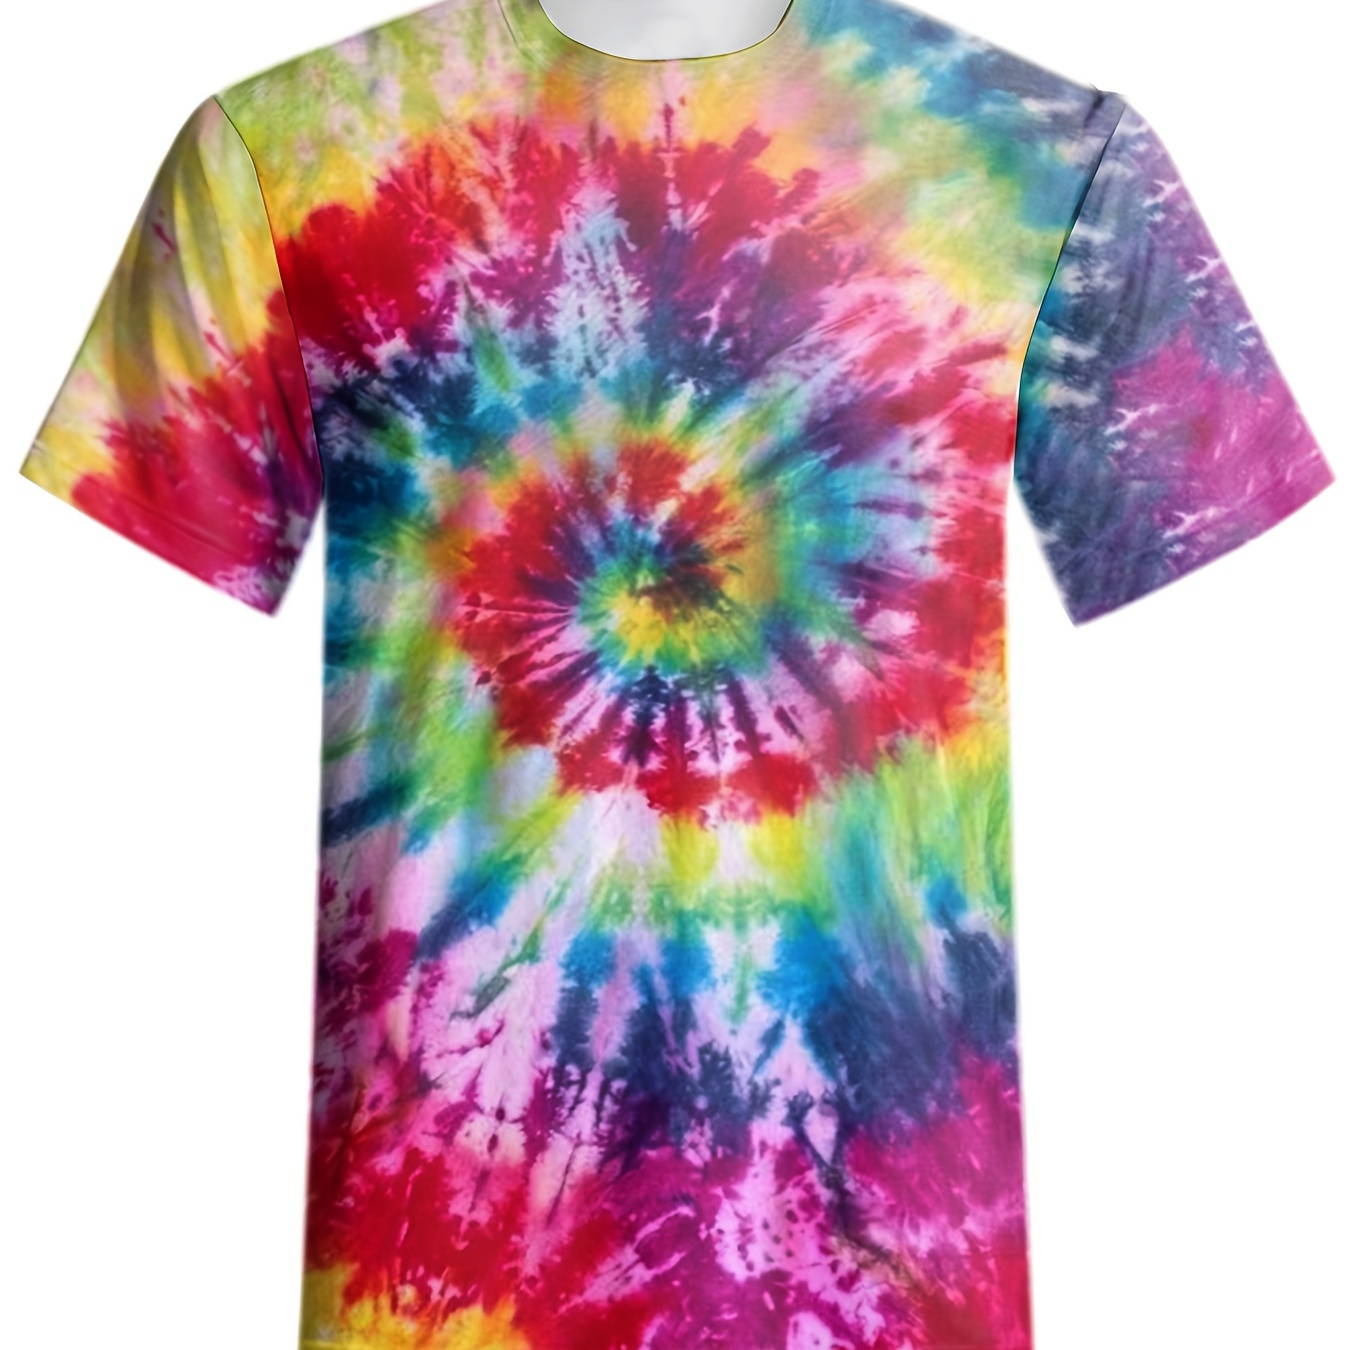 

Men's Tie-dye T-shirt, Active Slightly Stretch Breathable Tee, Men's Clothing For Summer Outdoor Sports